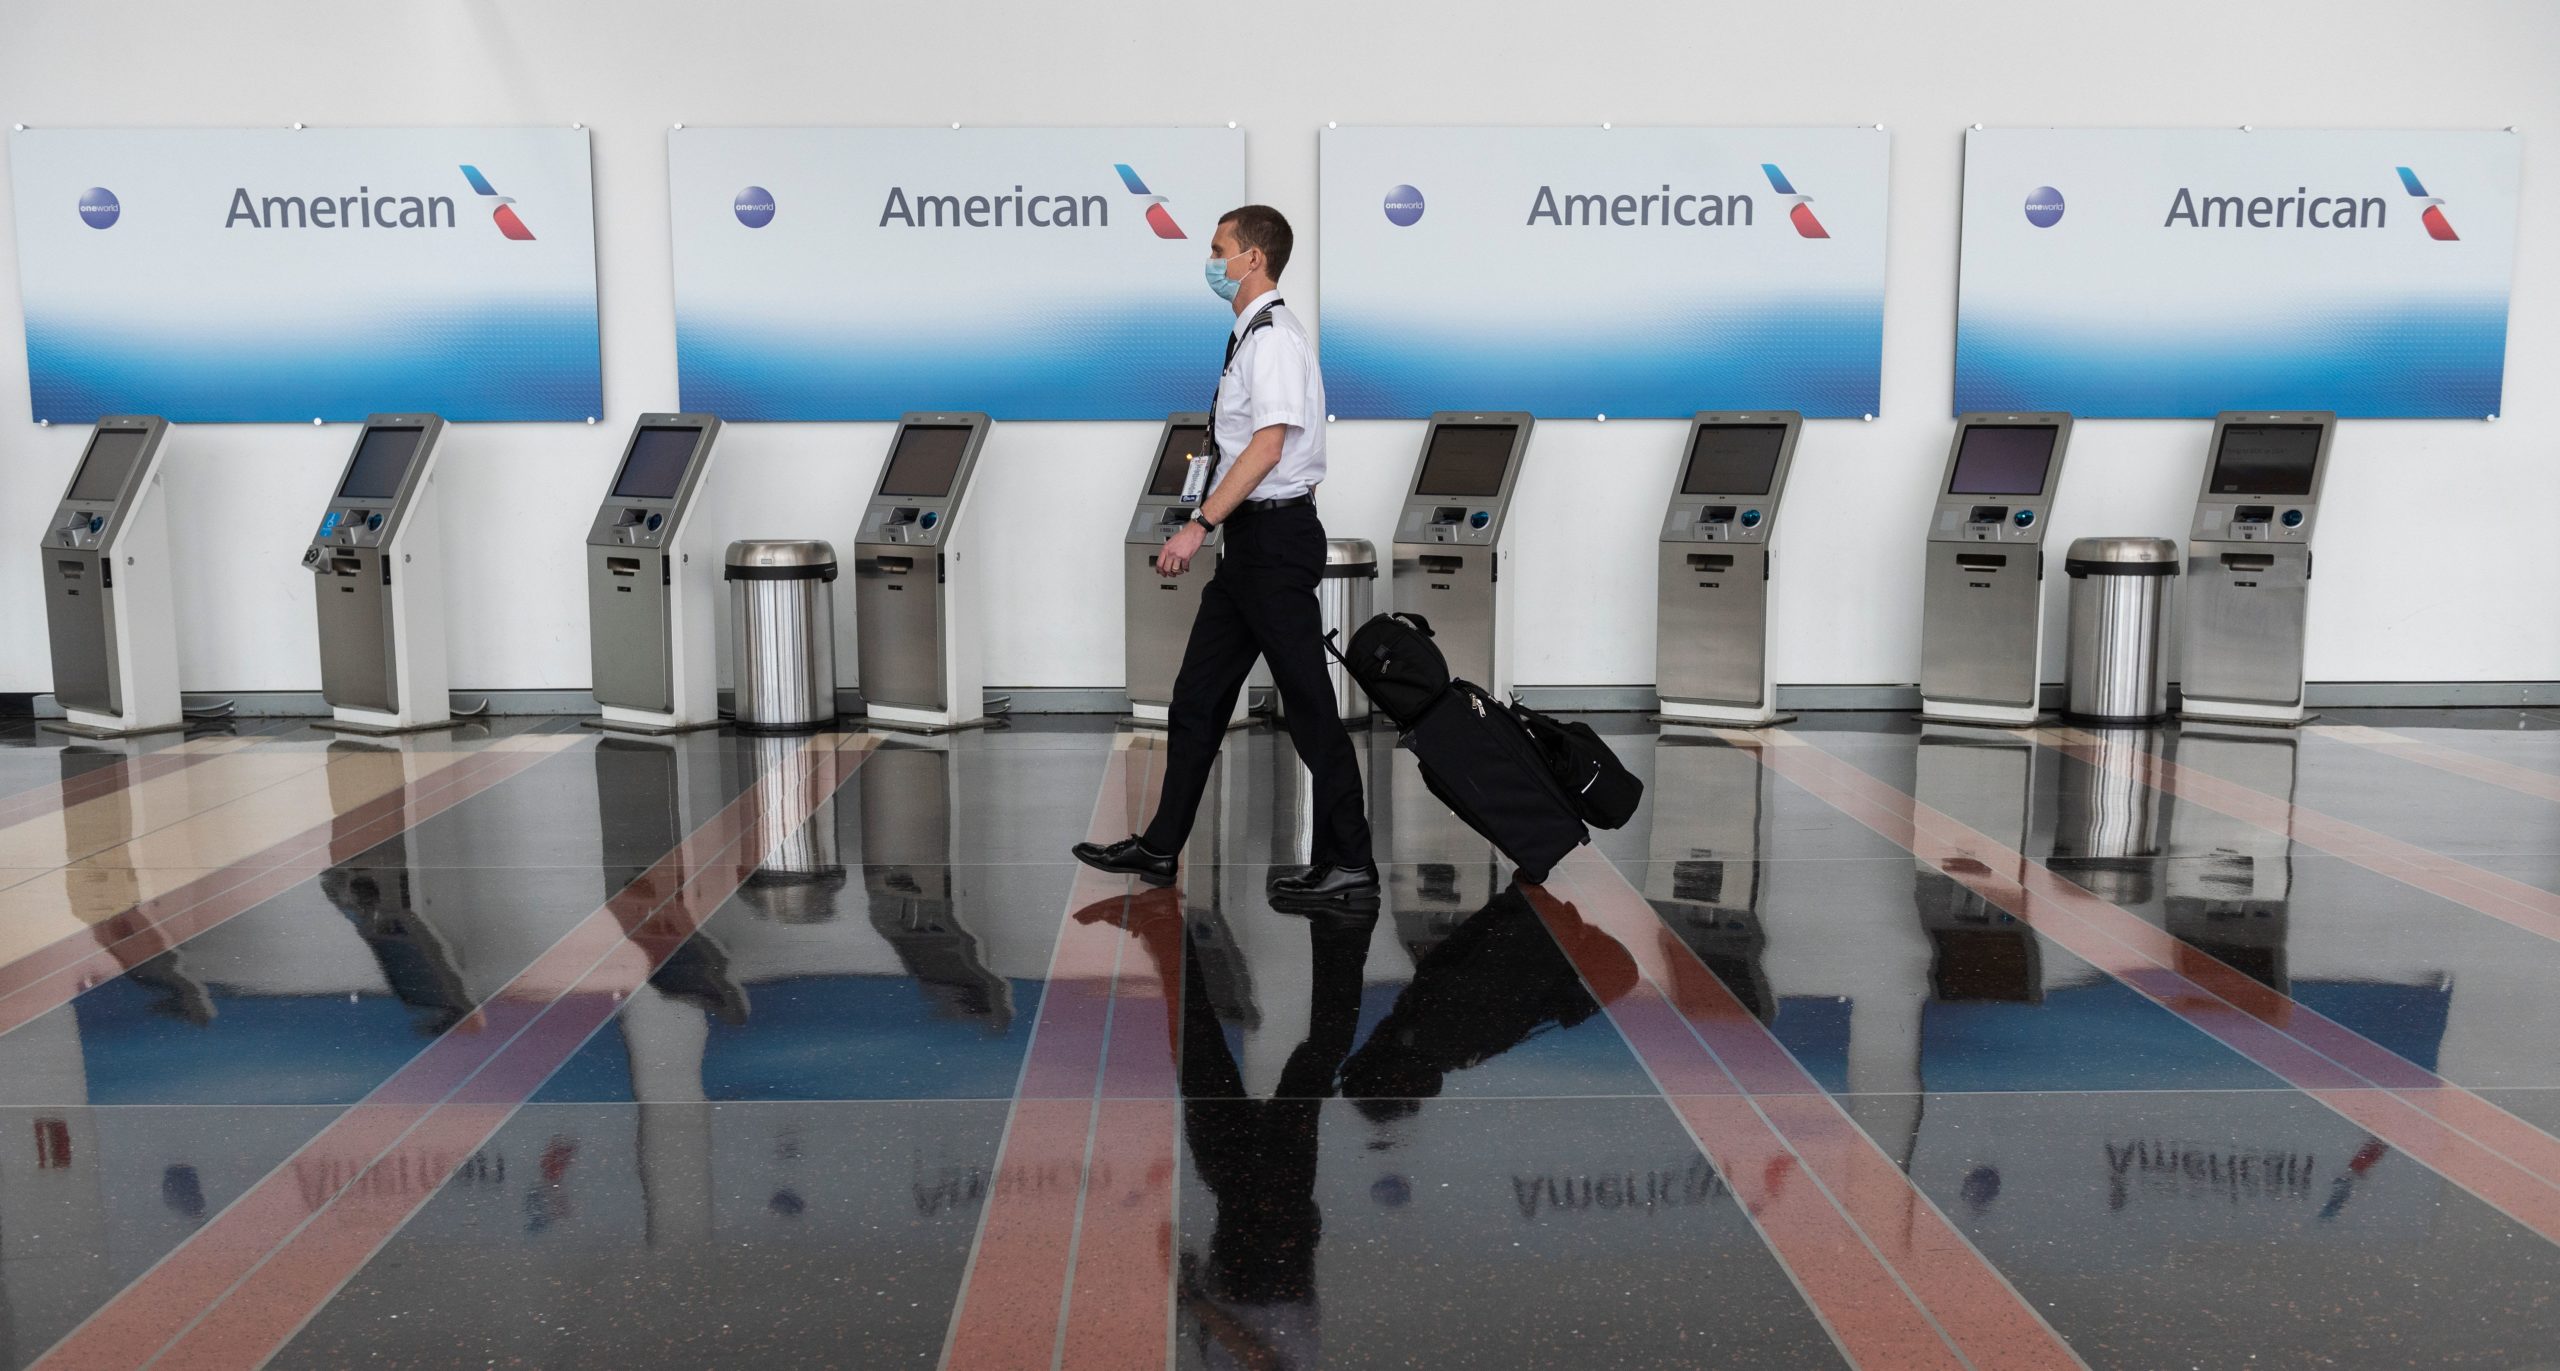 American Airways says it is overstaffed by 20,000 workers for fall schedule